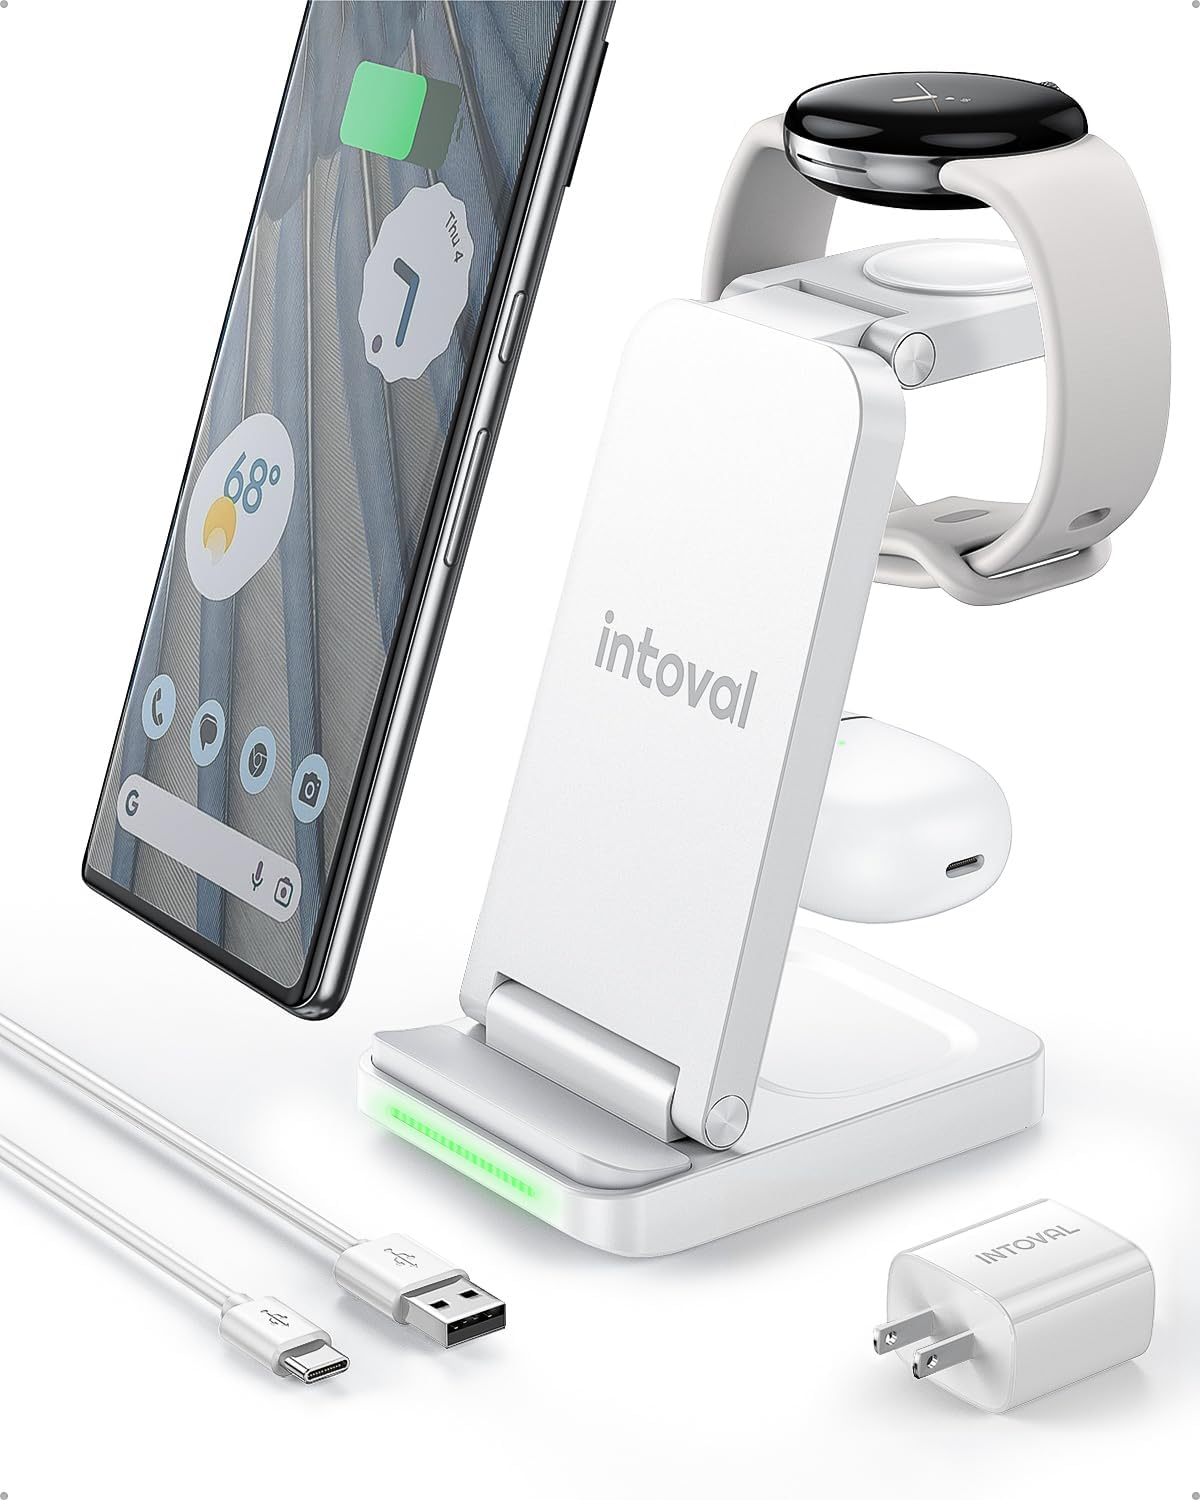 Intoval 3-in-1 Pixel Watch Charger, Portable Wireless Charging Station for Pixel 7a/7 Pro/7/6 Pro/6/5/4/3/XL, Google Pixel Watch, Pixel Buds Pro/2, iPhones, Androids and Qi-Enabled Phones (G3, White)